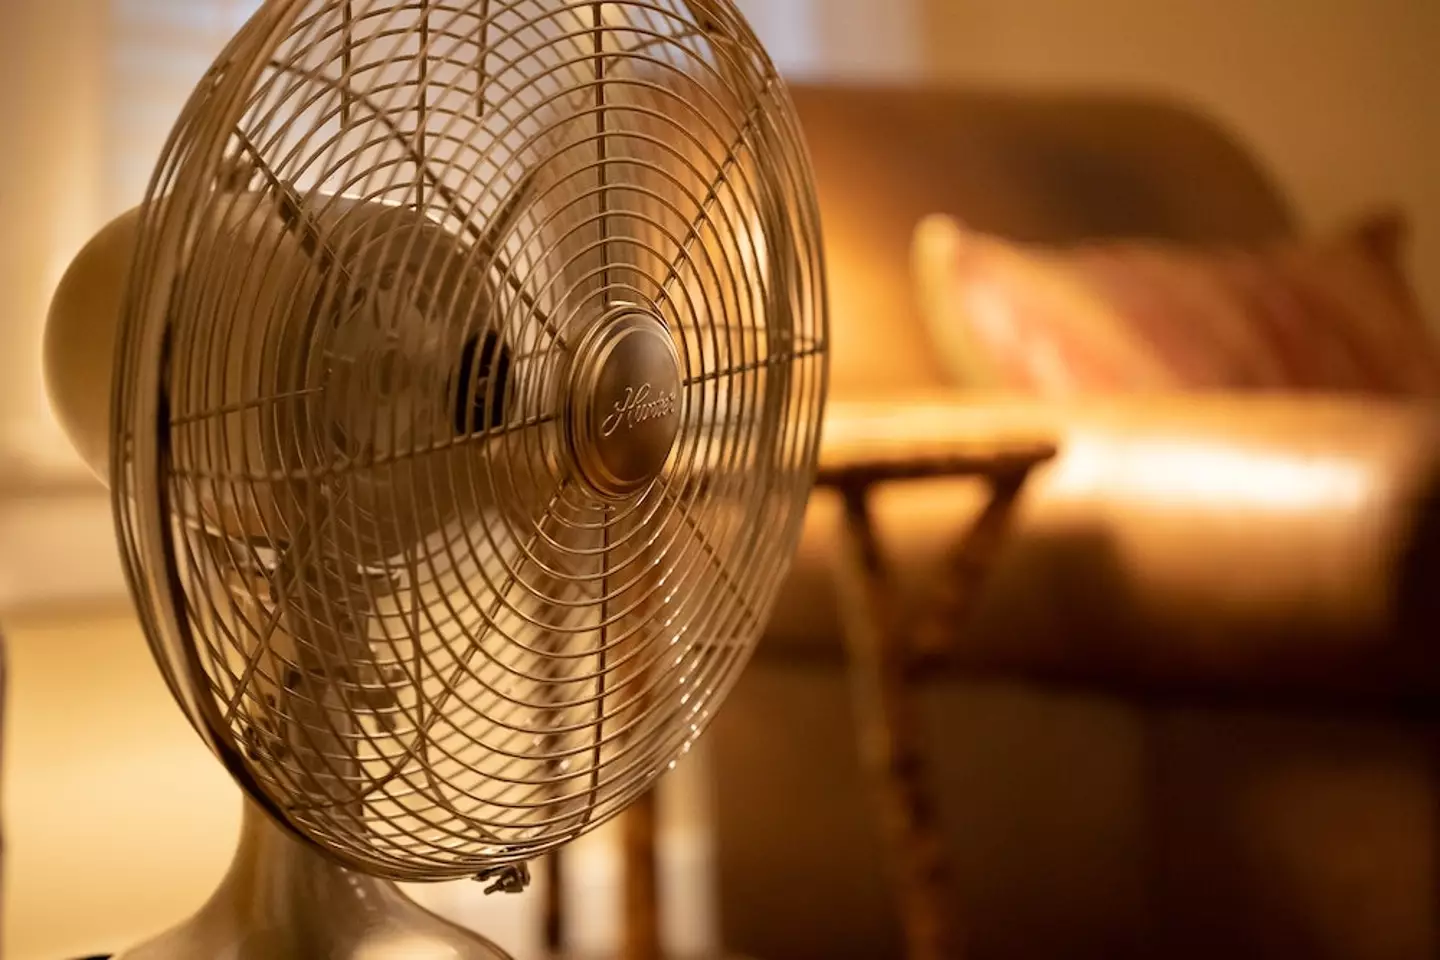 Sleeping with a fan on might not be the best idea.